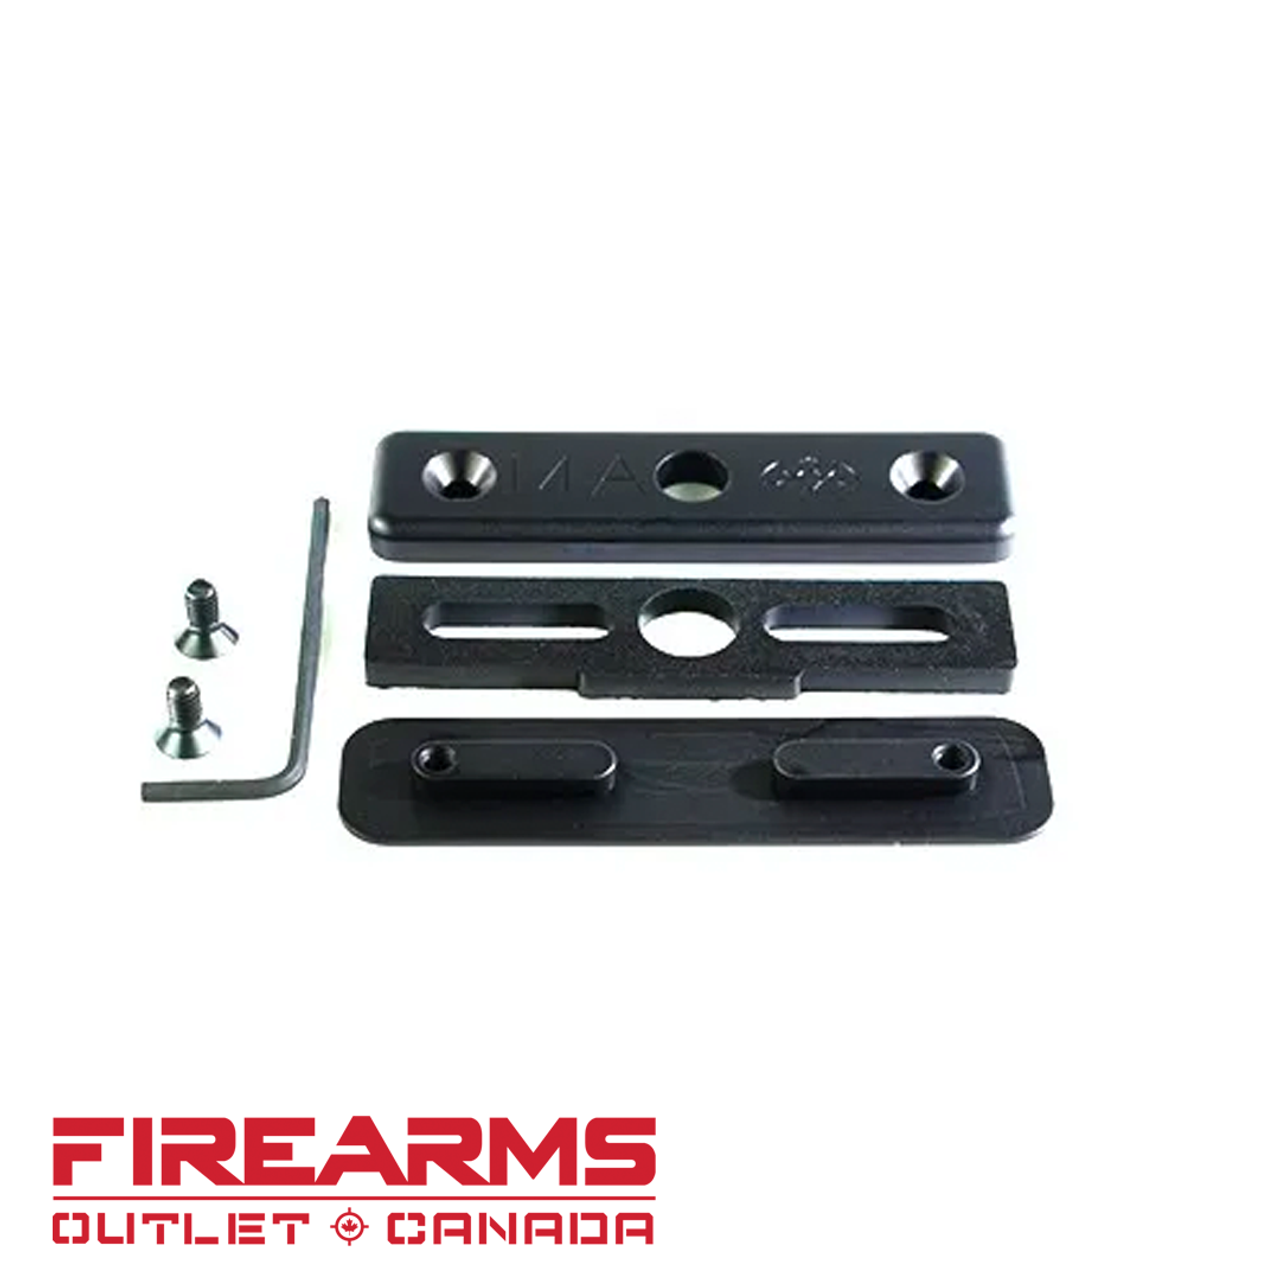 Manticore Arms - X95 Gasketed Port Cover [MA-11900]